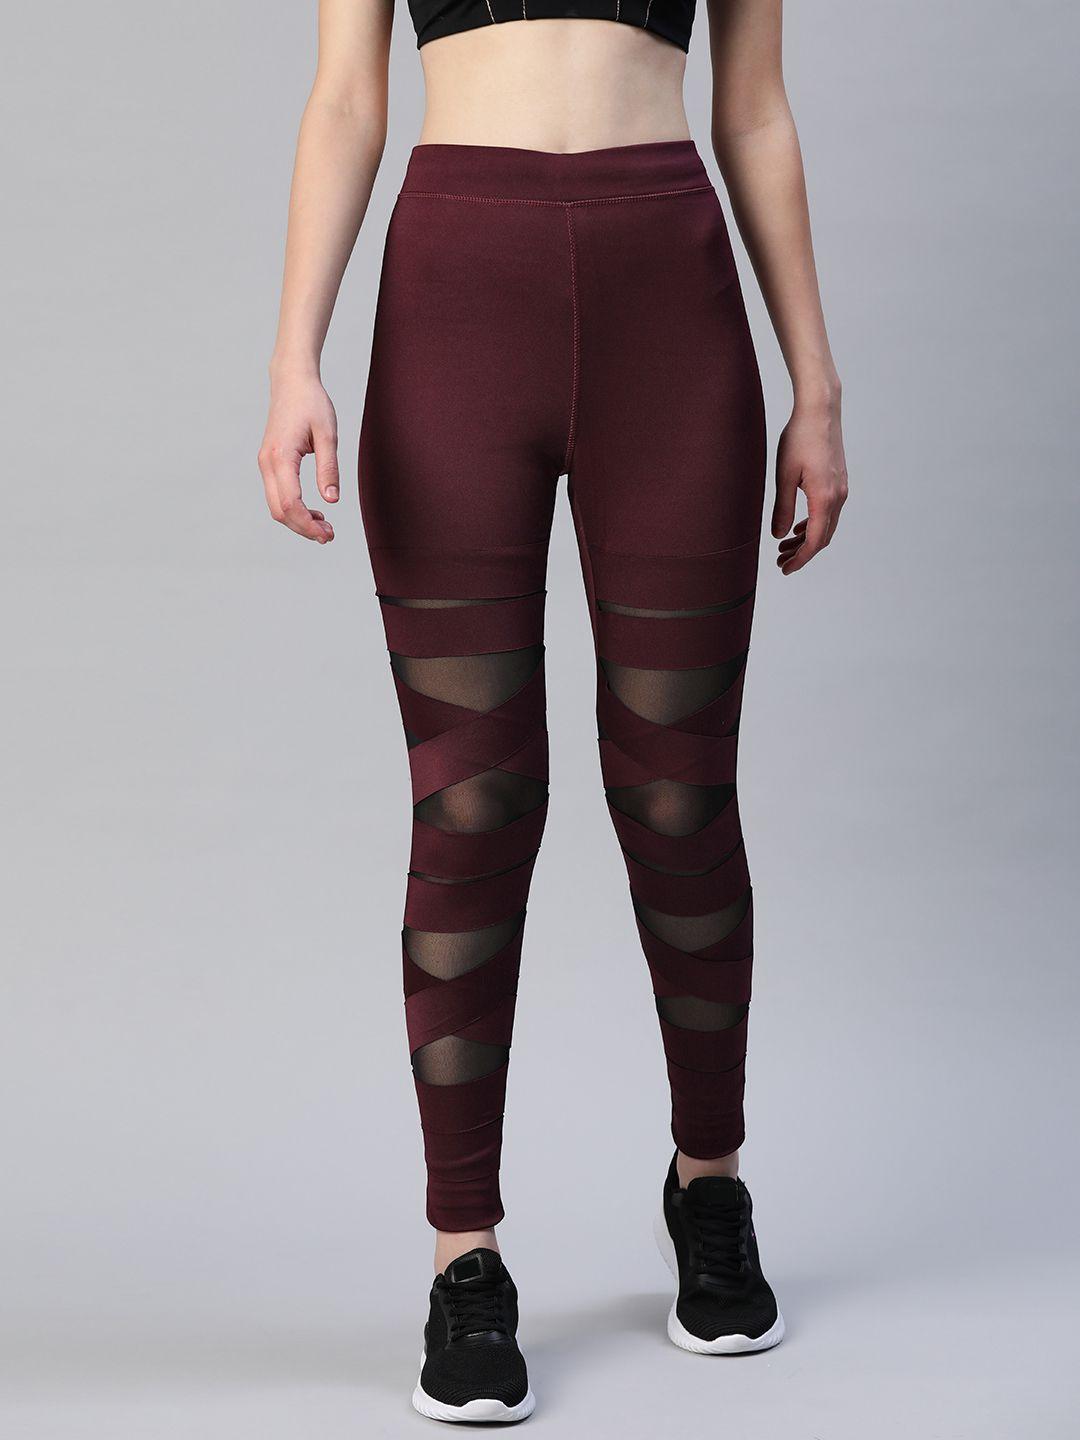 blinkin women maroon rapid dry tights with breathable mesh panels